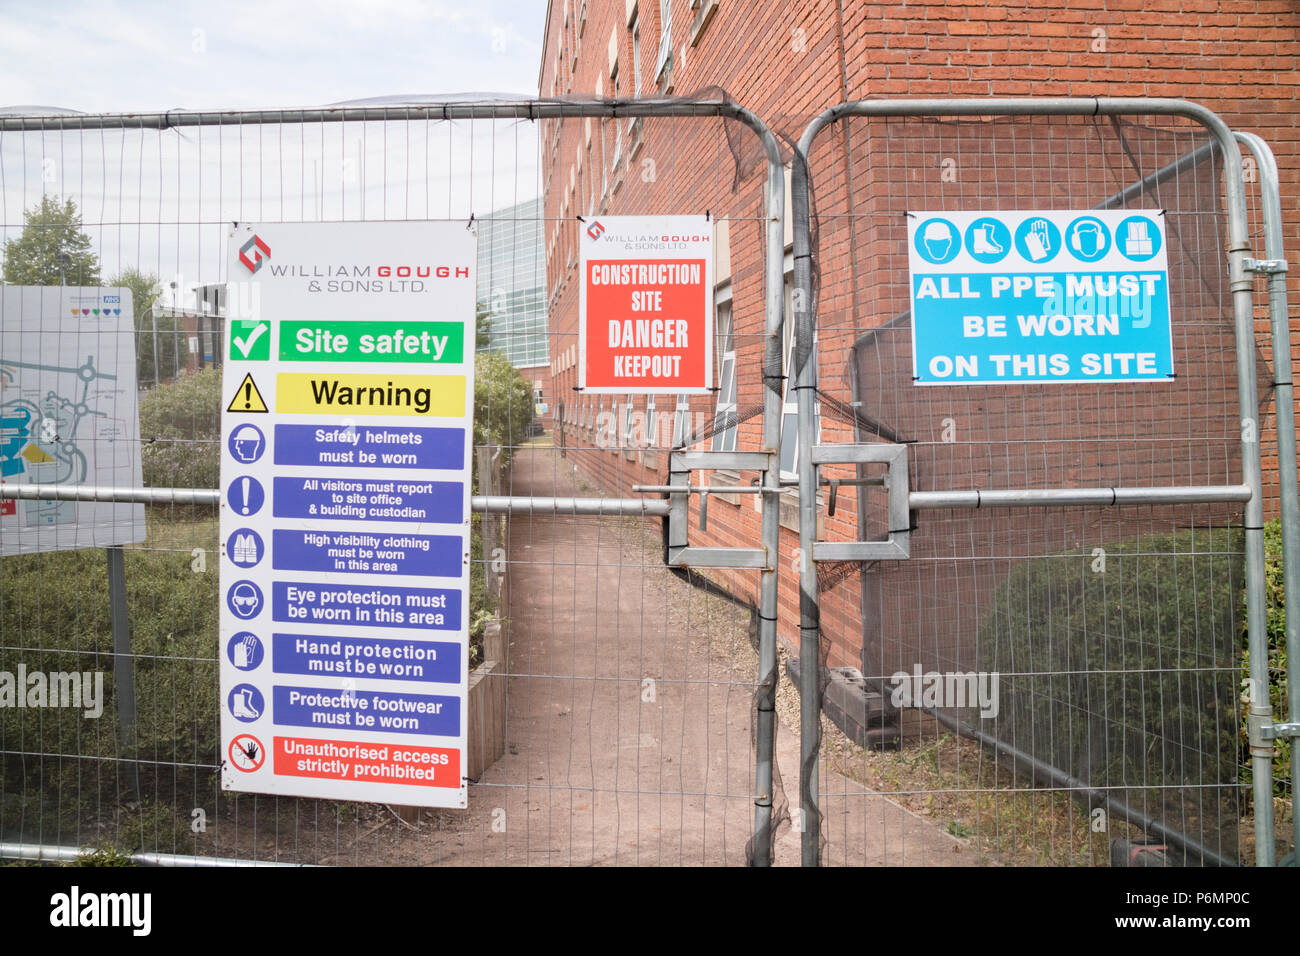 Health and safety signage and security fencing on a construction site, England, UK Stock Photo